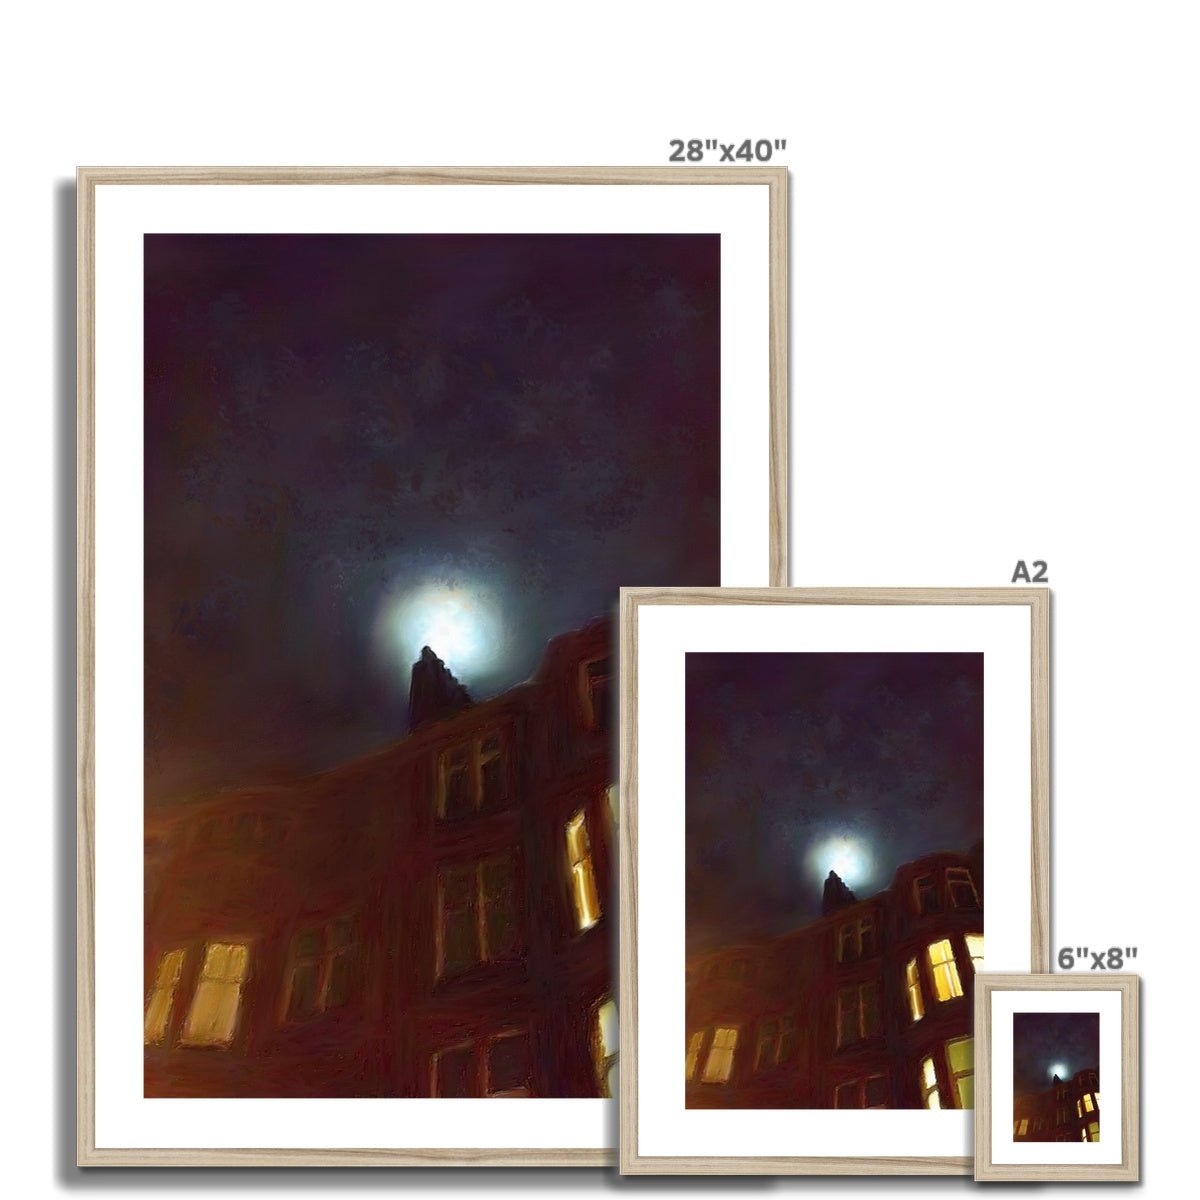 A Moonlit Tenement Painting | Framed & Mounted Prints From Scotland-Framed & Mounted Prints-Edinburgh & Glasgow Art Gallery-Paintings, Prints, Homeware, Art Gifts From Scotland By Scottish Artist Kevin Hunter